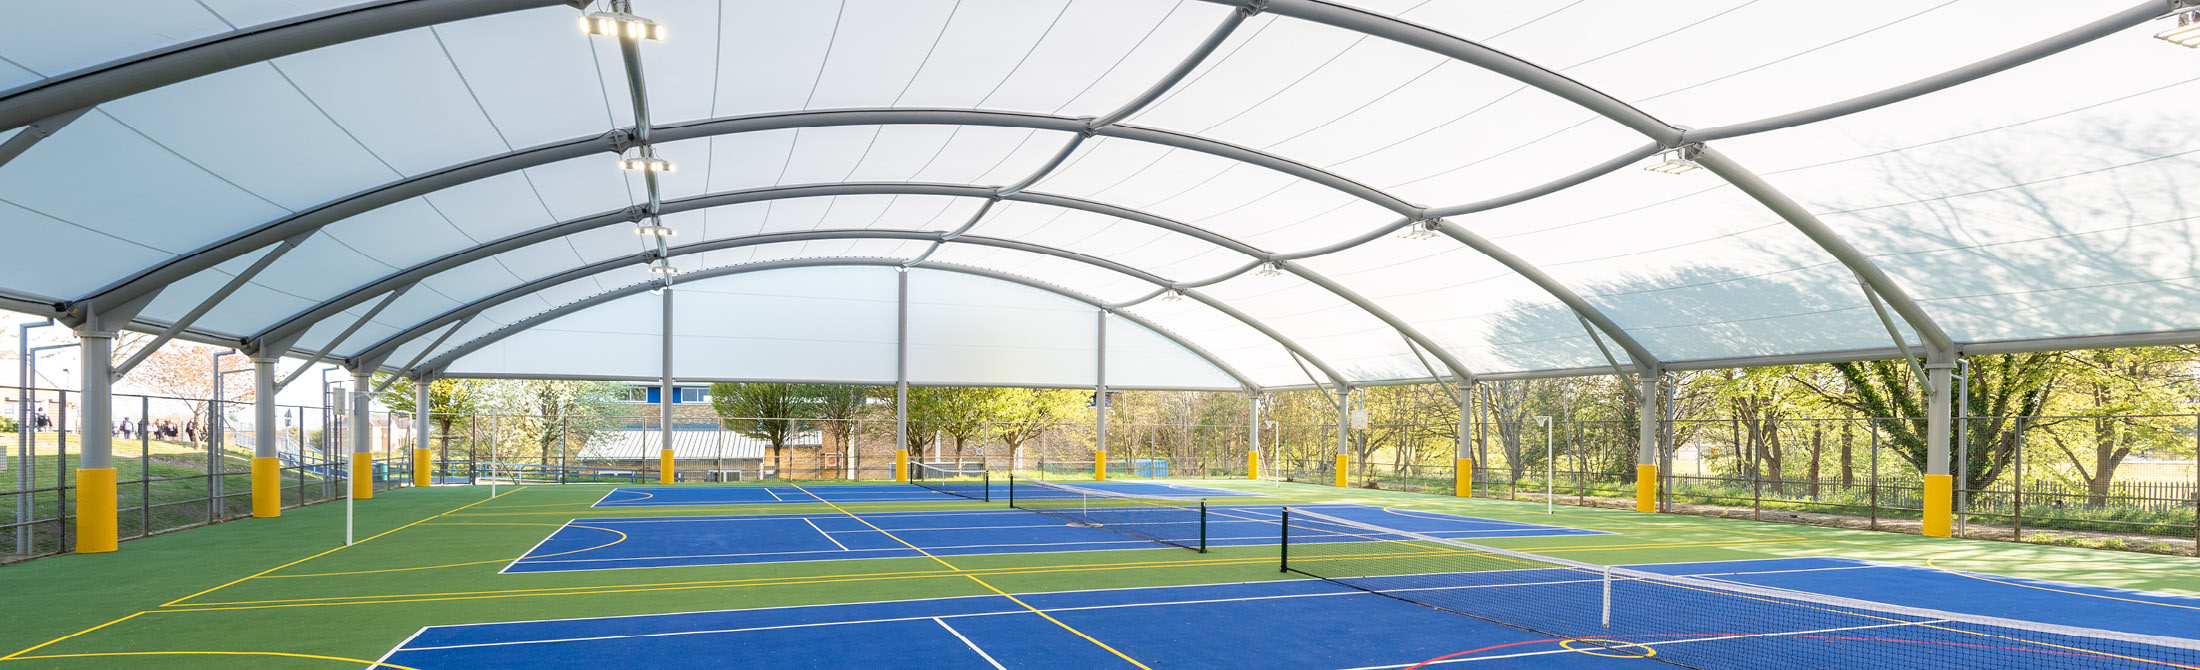 MUGA sports canopy covering multiple tennis courts